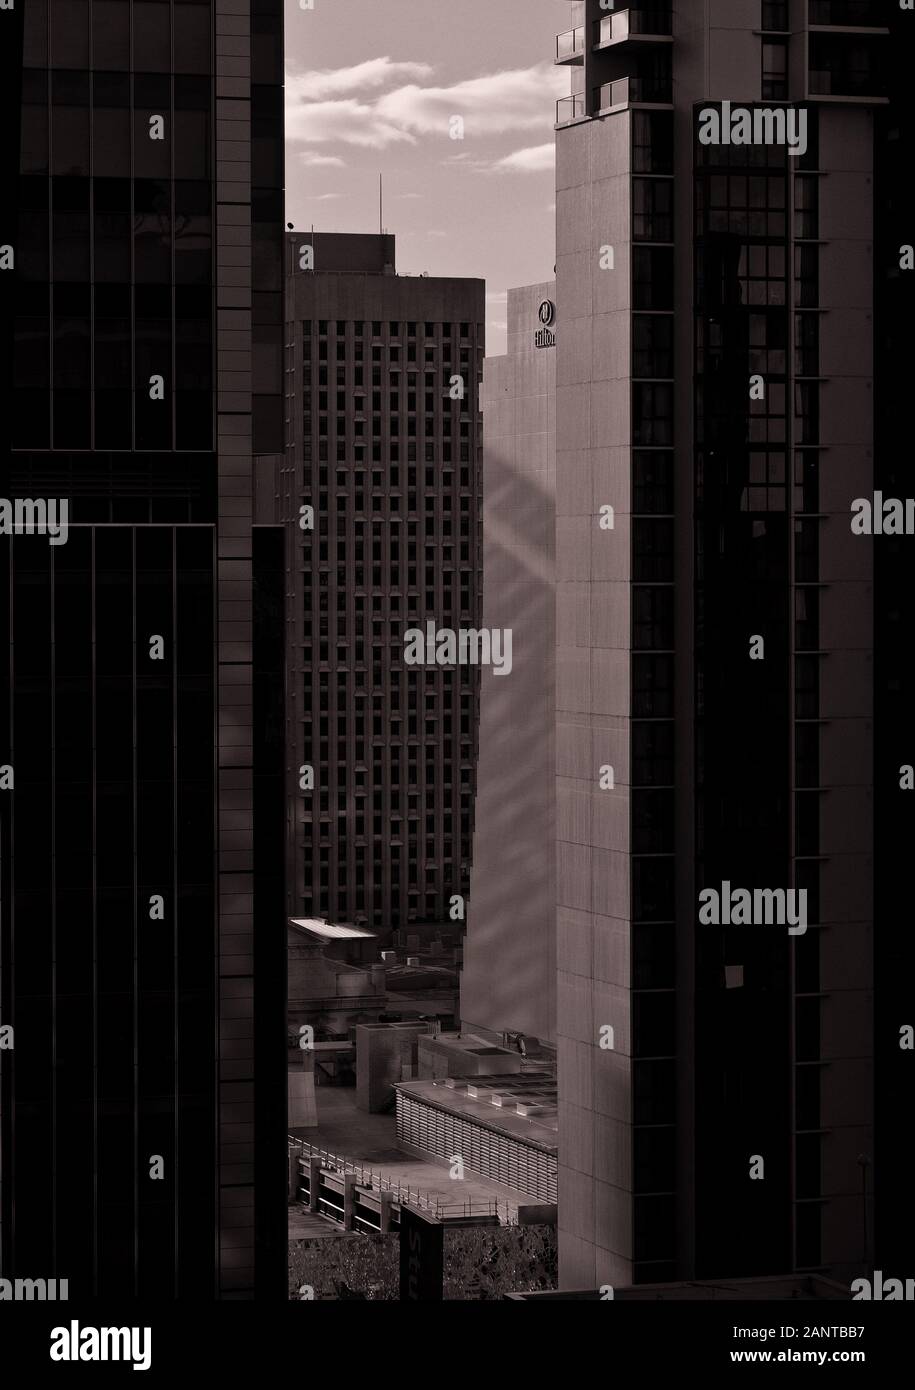 Monochrome cityscape of hi-rise building facades as symbols of dynamic business growth in modern city Stock Photo